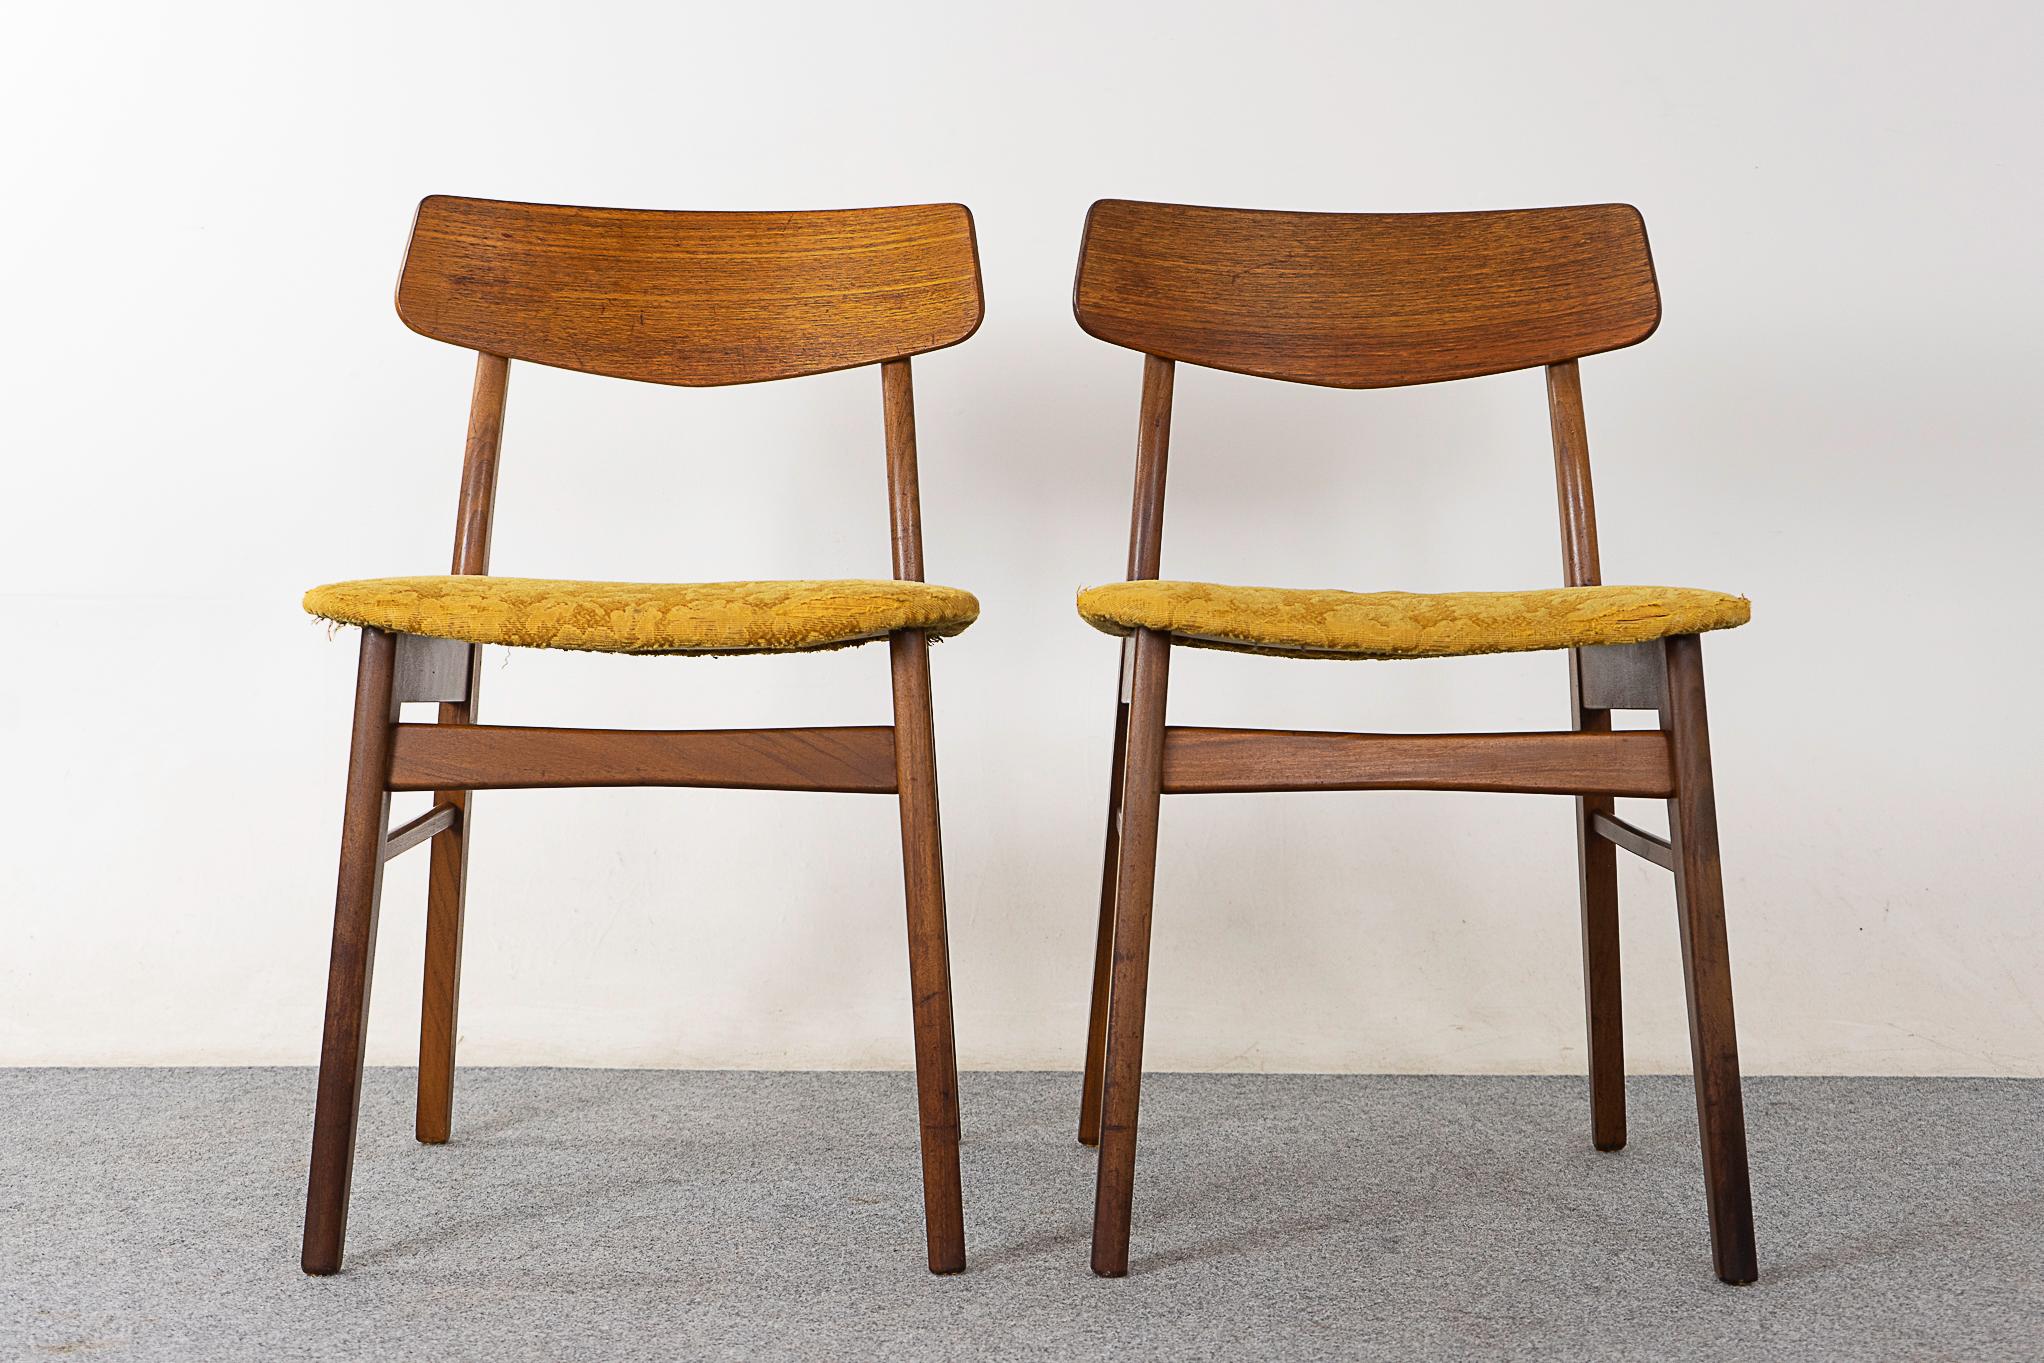 Teak mid-century dining chairs, circa 1960's. Beautifully curved teak backrests and generous seat design. Beech frame with removable seat pad for easy reupholstering!

Unrestored item with option to purchase in restored condition for an additional